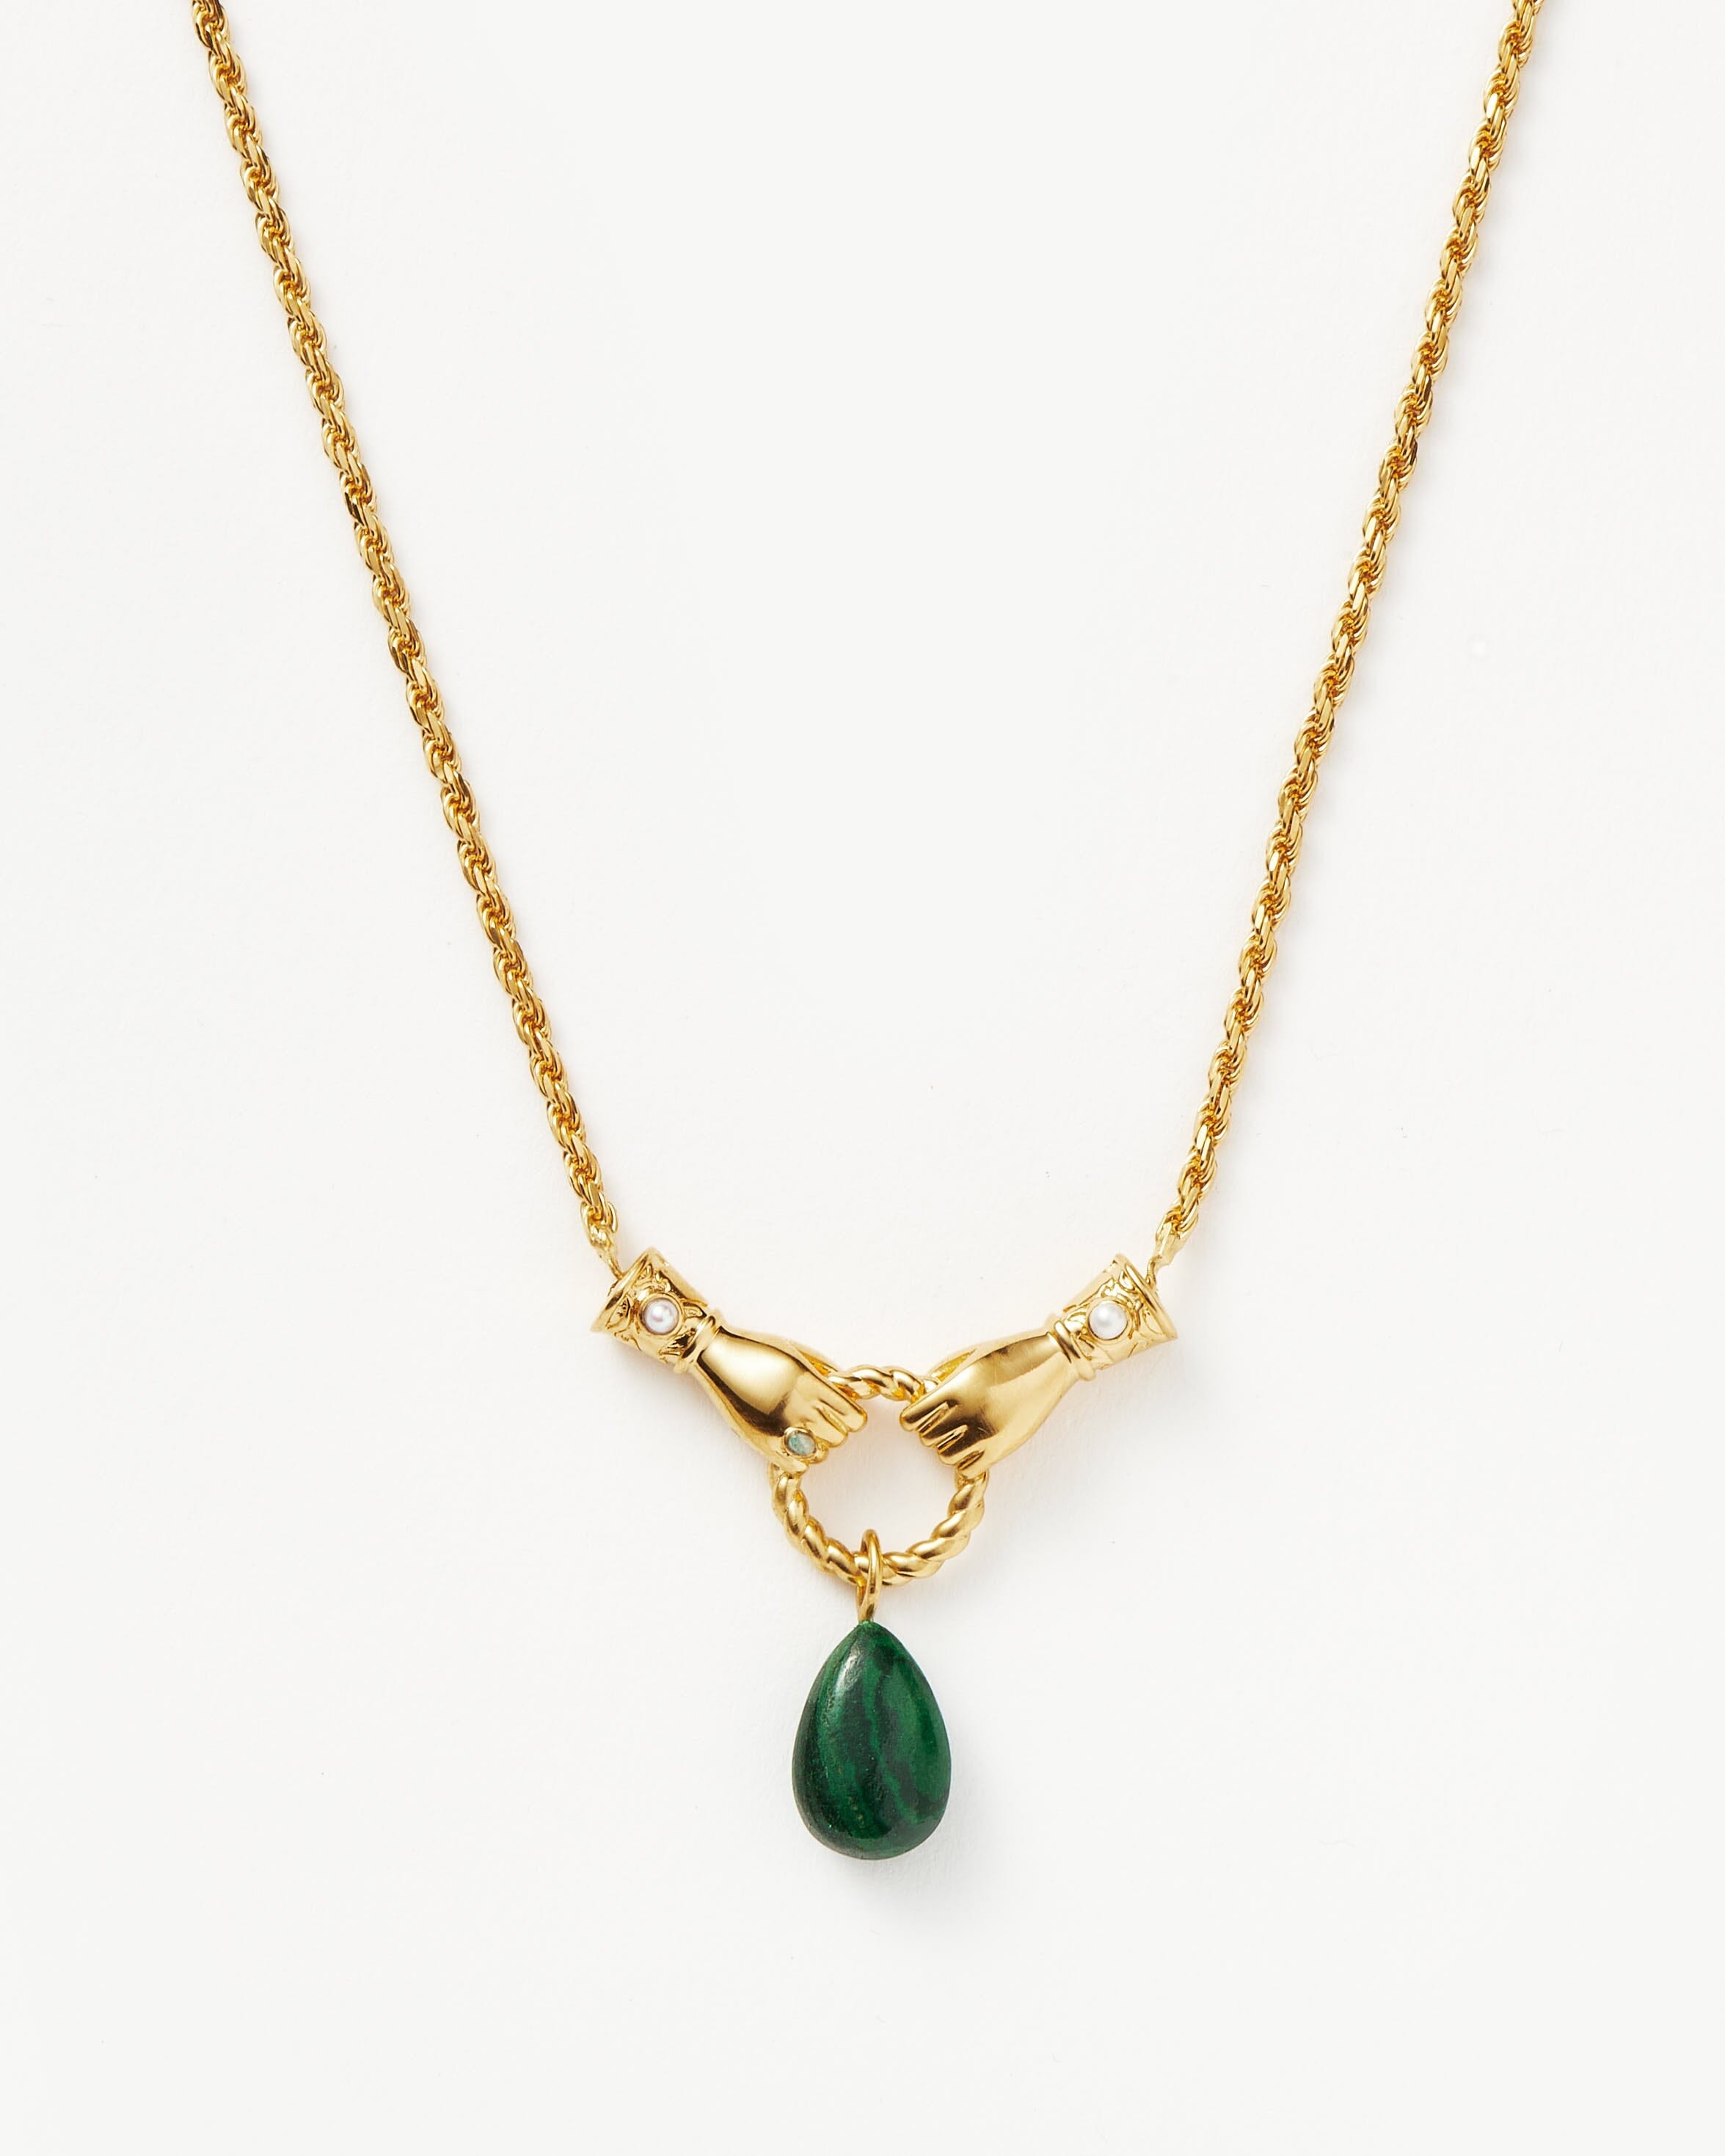 Missoma Harris Reed in Good Hands Drop Pendant Necklace | 18ct Gold Plated/Malachite & Pearl